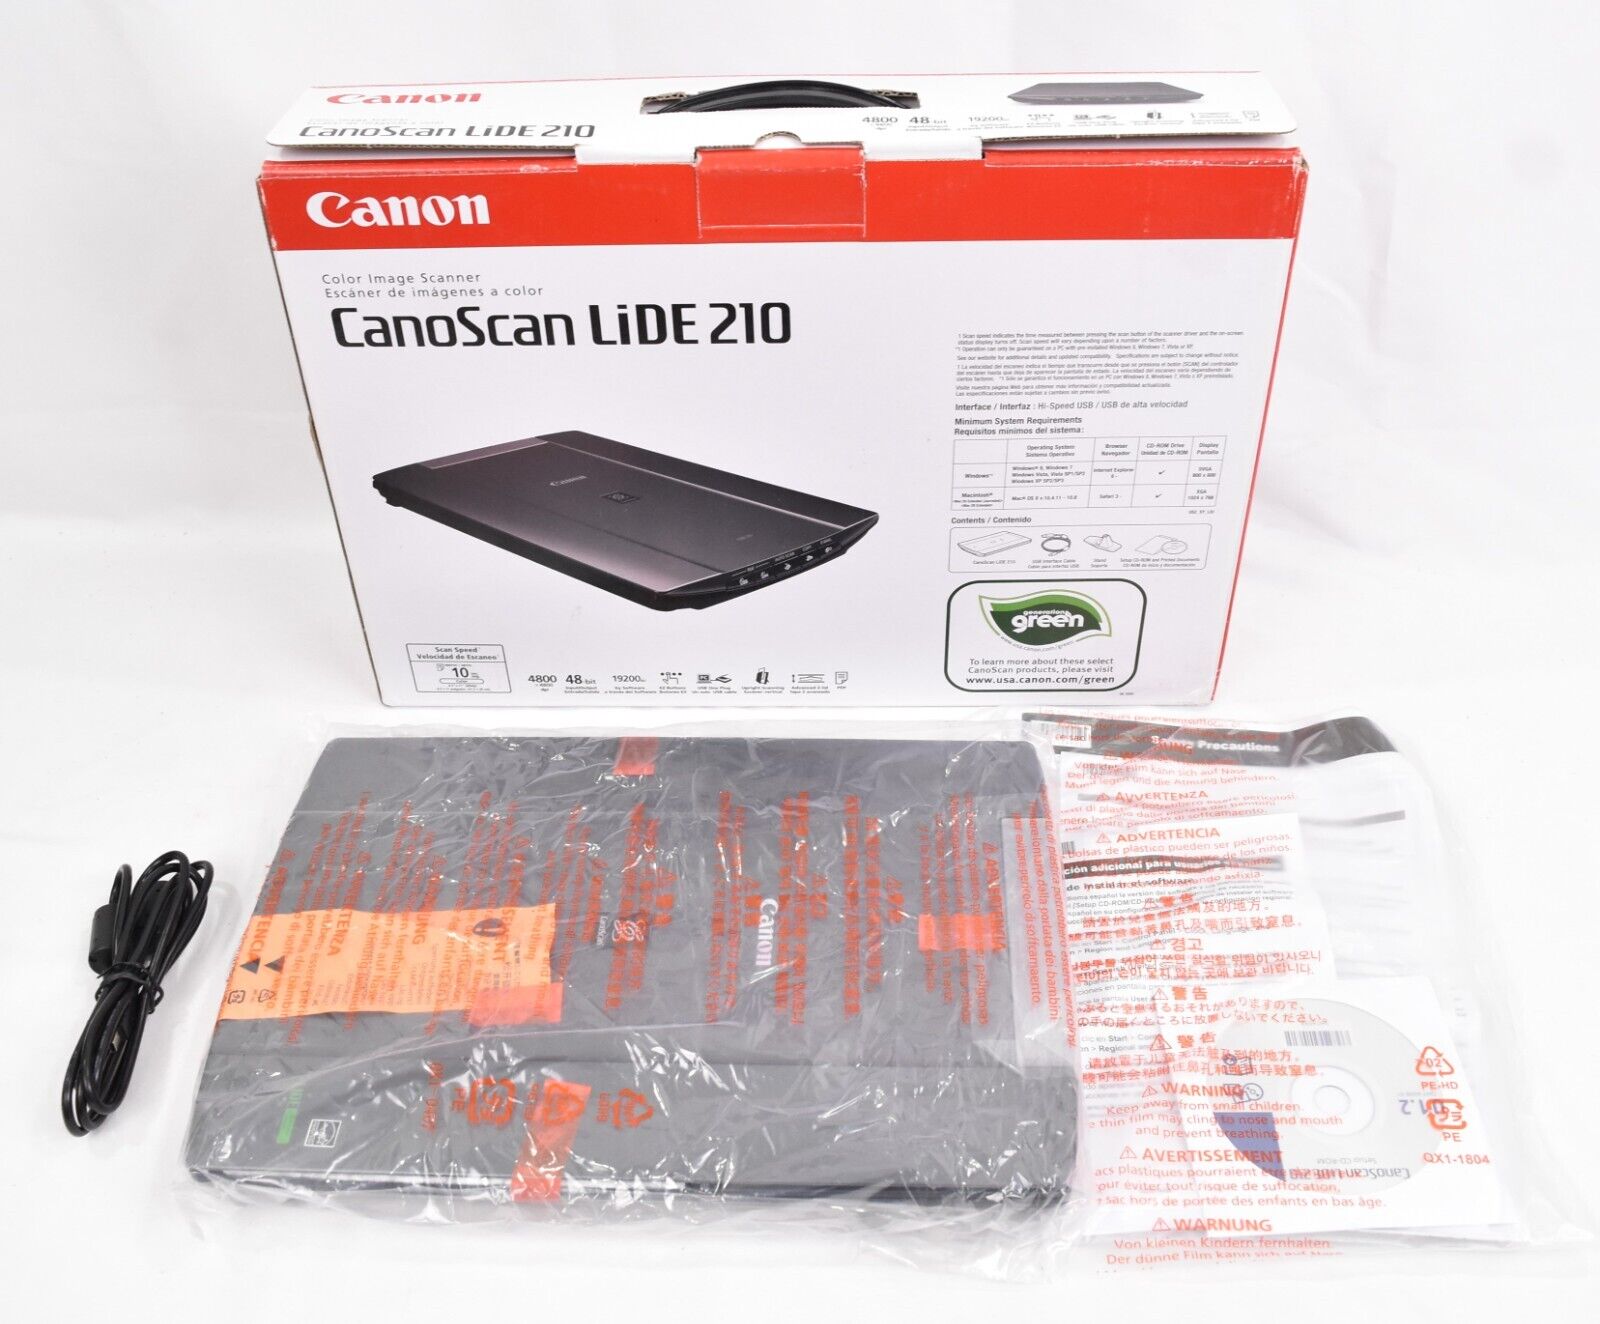 Canon CanoScan LiDE 210 Flatbed Color Image Scanner No Stand